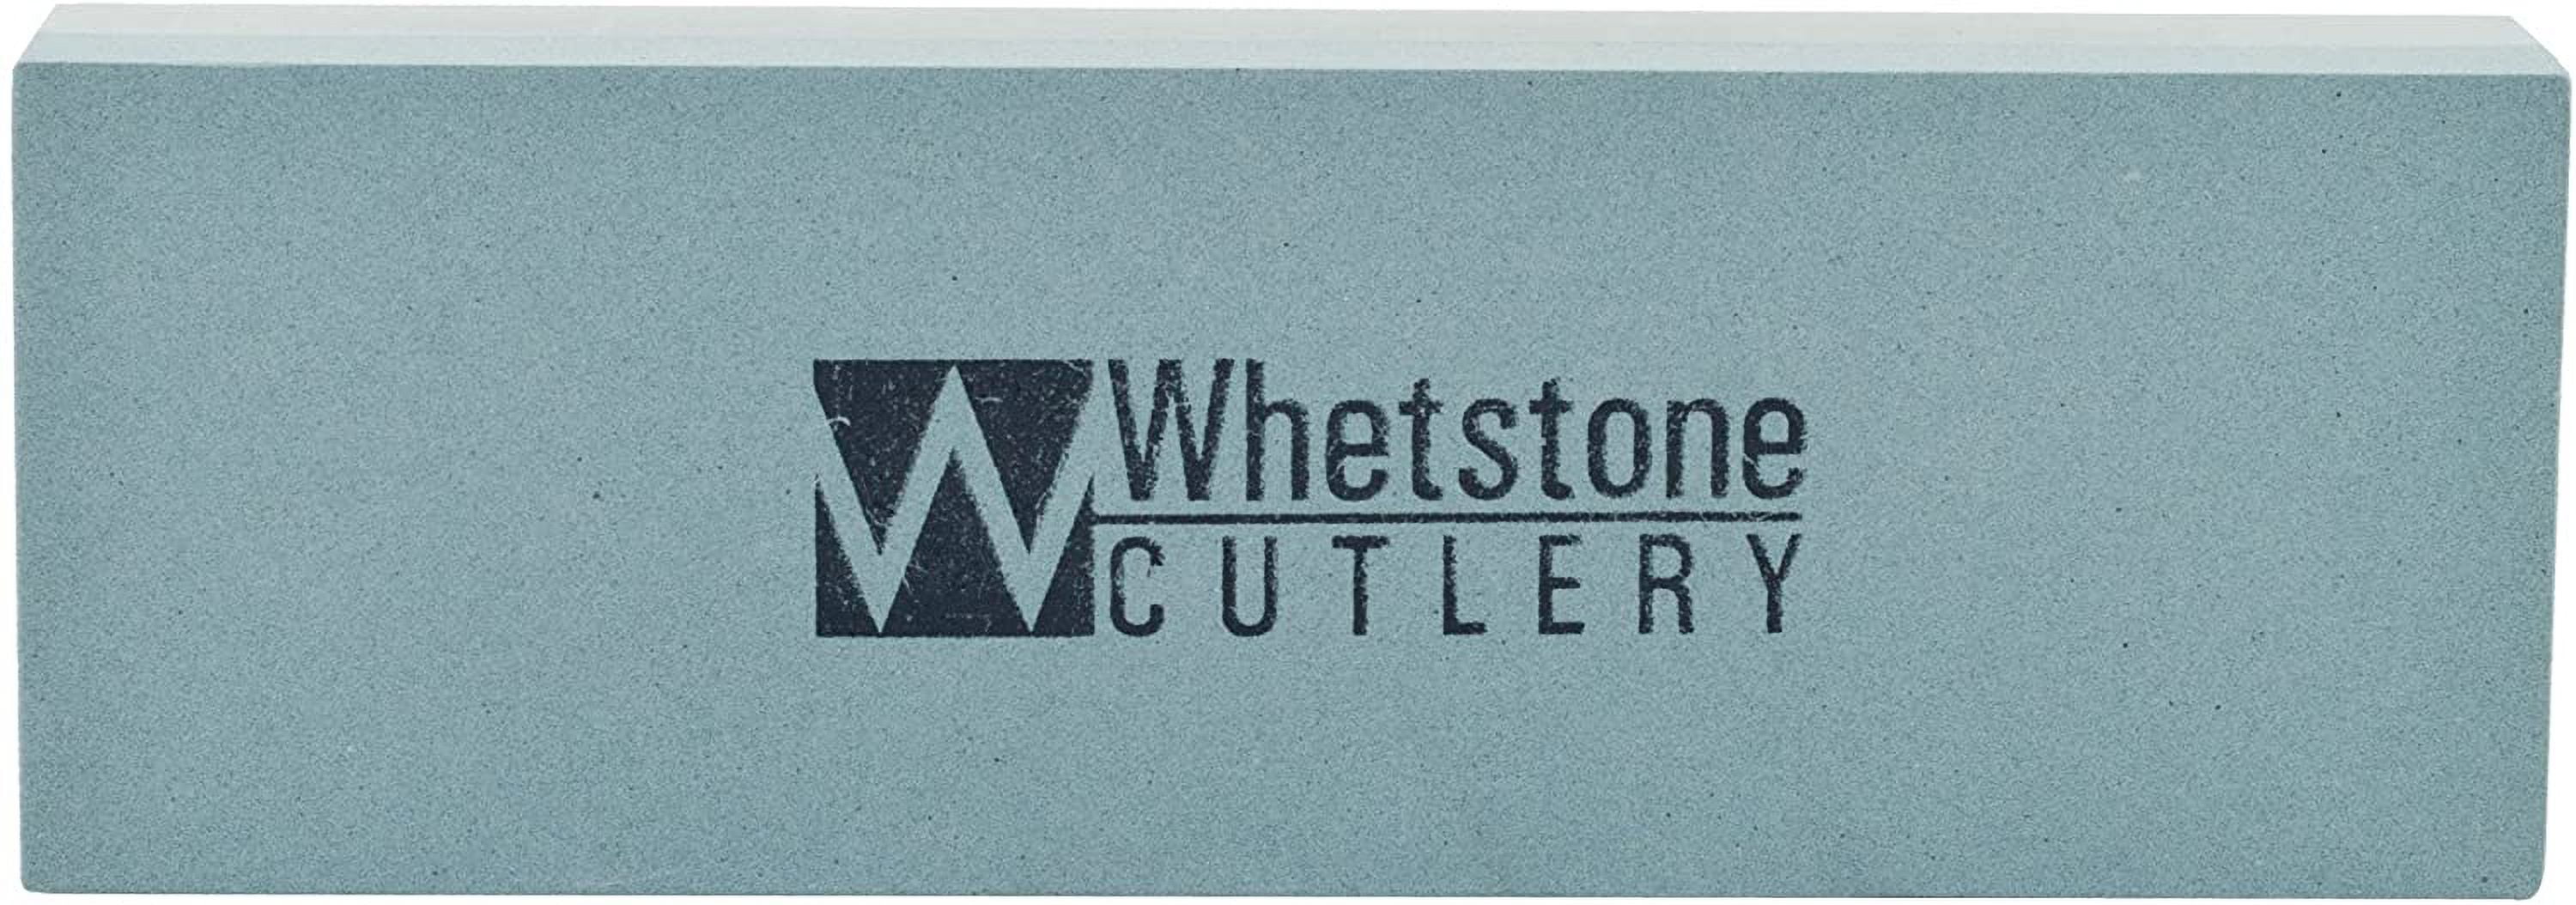 Knife Sharpening Stone – Dual Sided 400/1000 Grit Water Stone – Sharpener,  Polishing Tool for Kitchen, Hunting, Pocket Knives or Blades by Whetstone